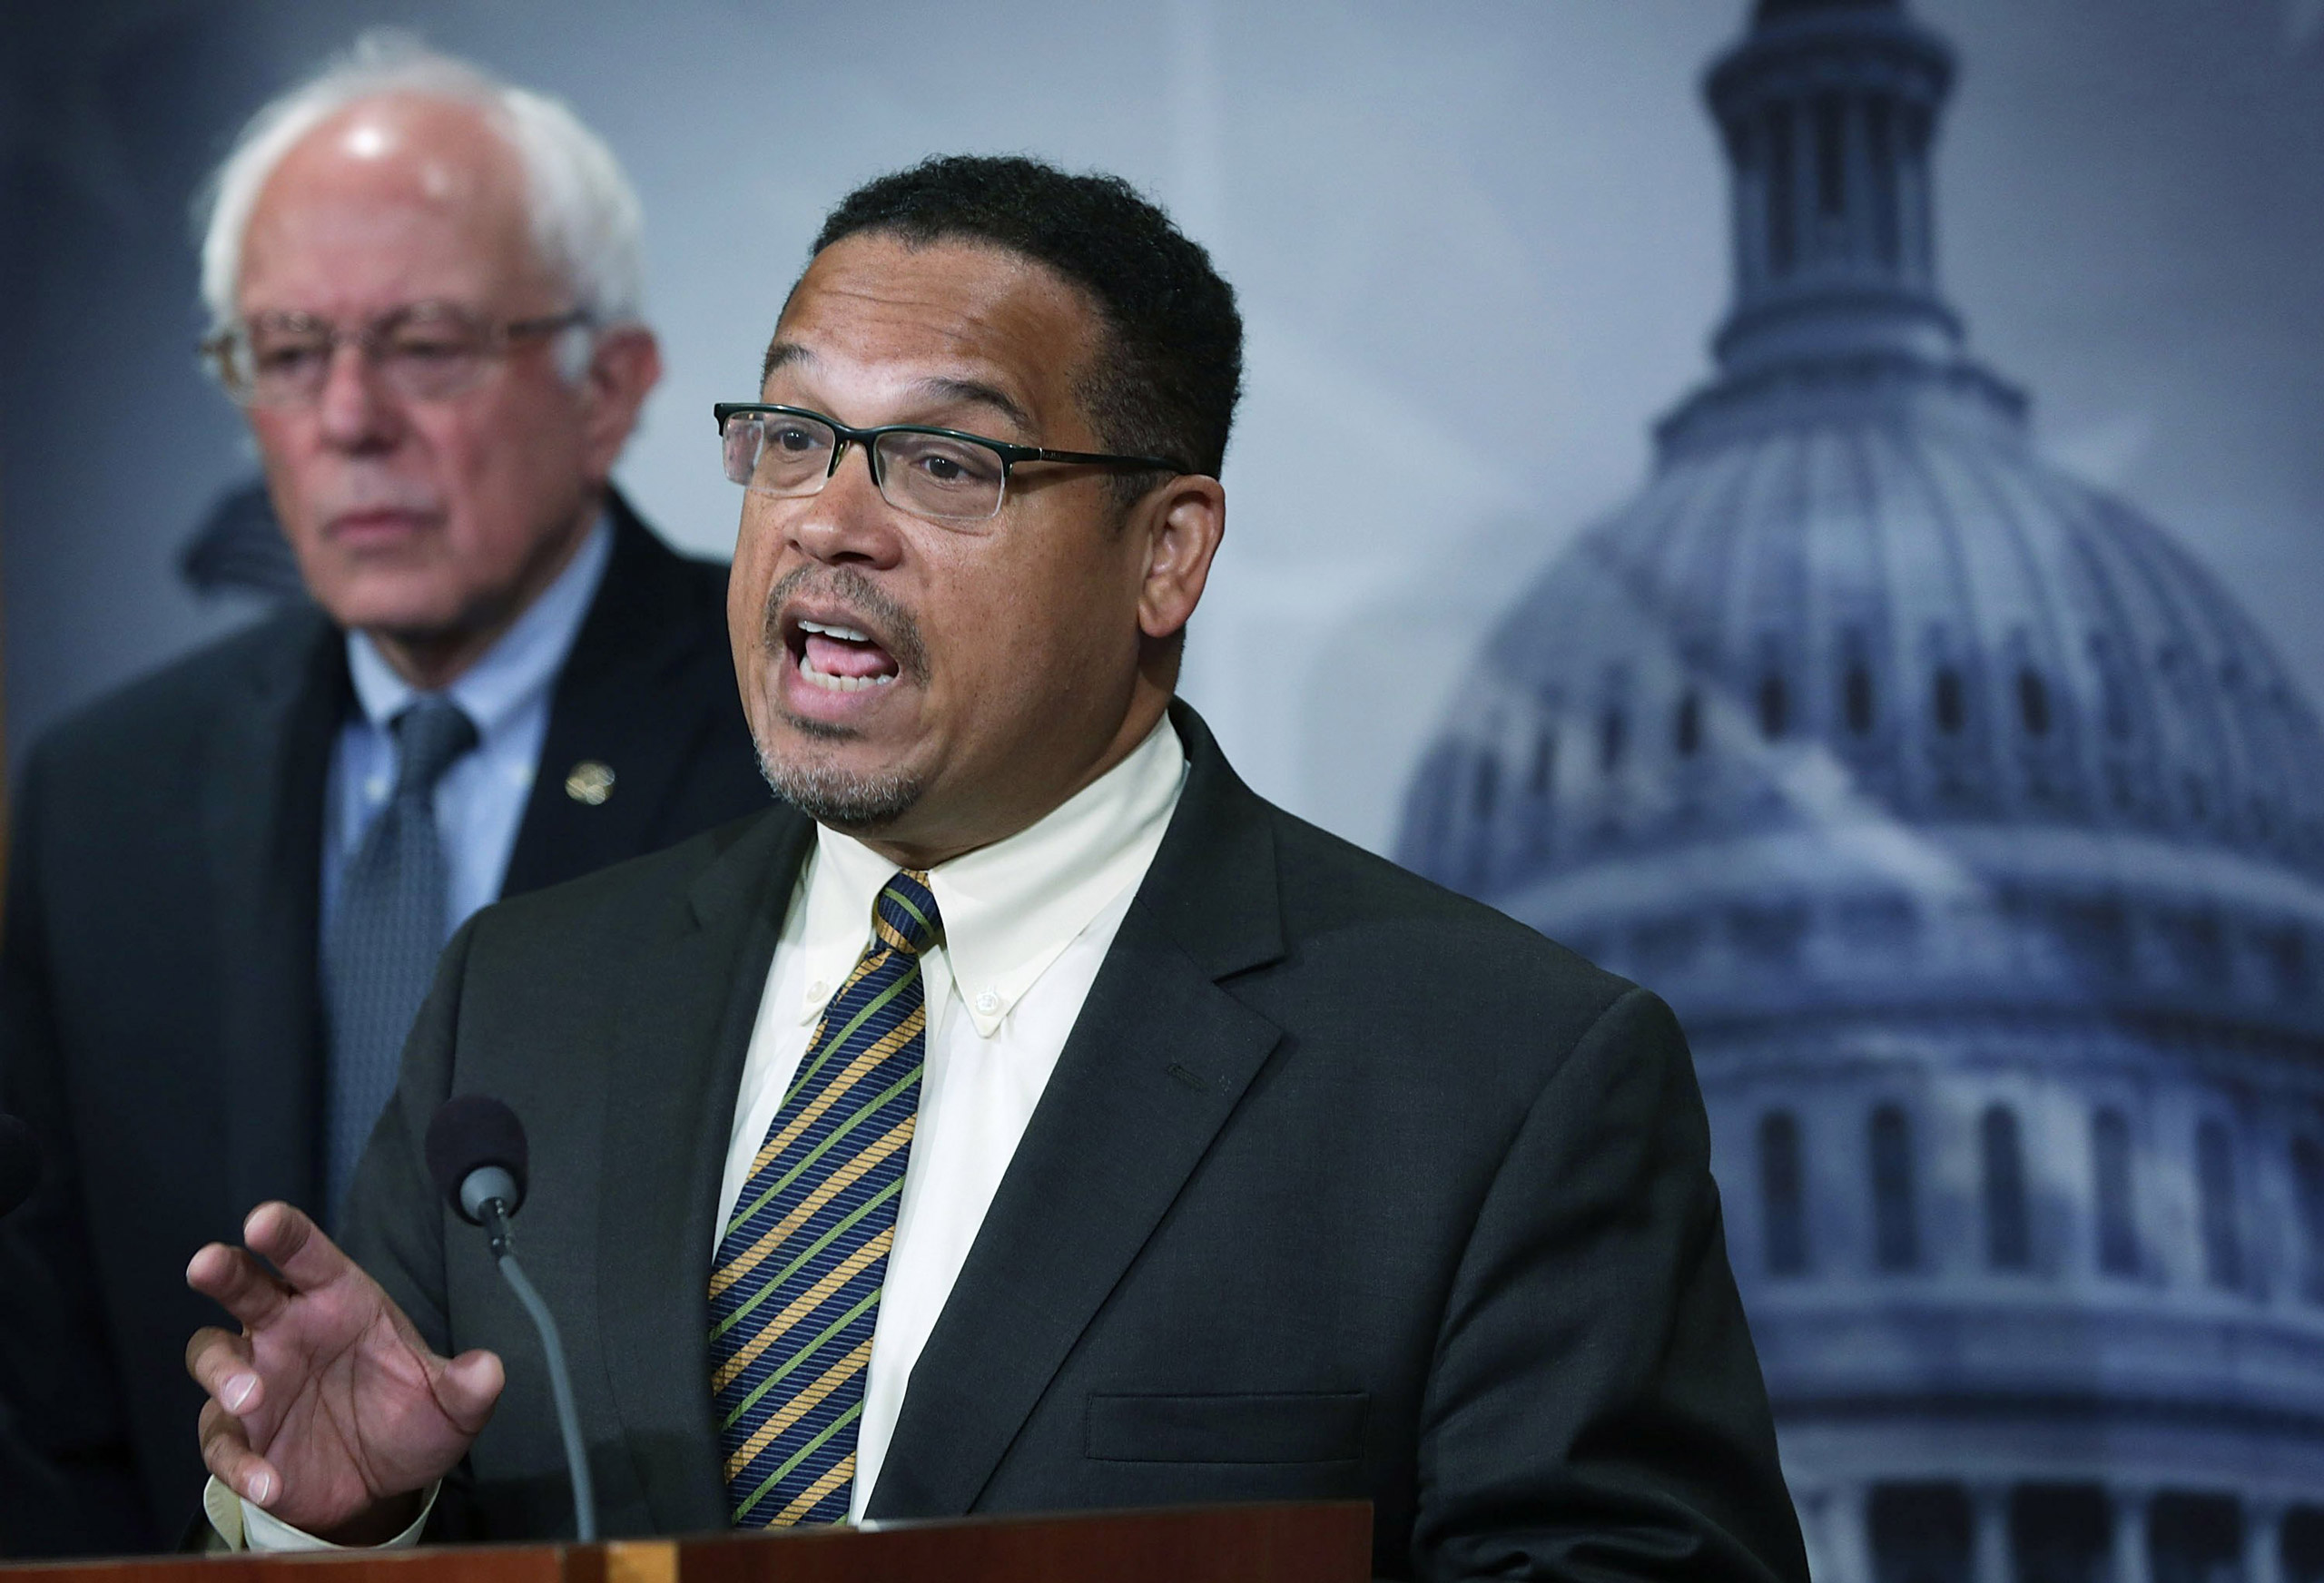 Sen. Bernie Sanders and Rep. Keith Ellison speak to members of the media during a news conference about private prisons on Capitol Hill in Washington on Sept. 17, 2015. (Alex Wong—Getty Images)